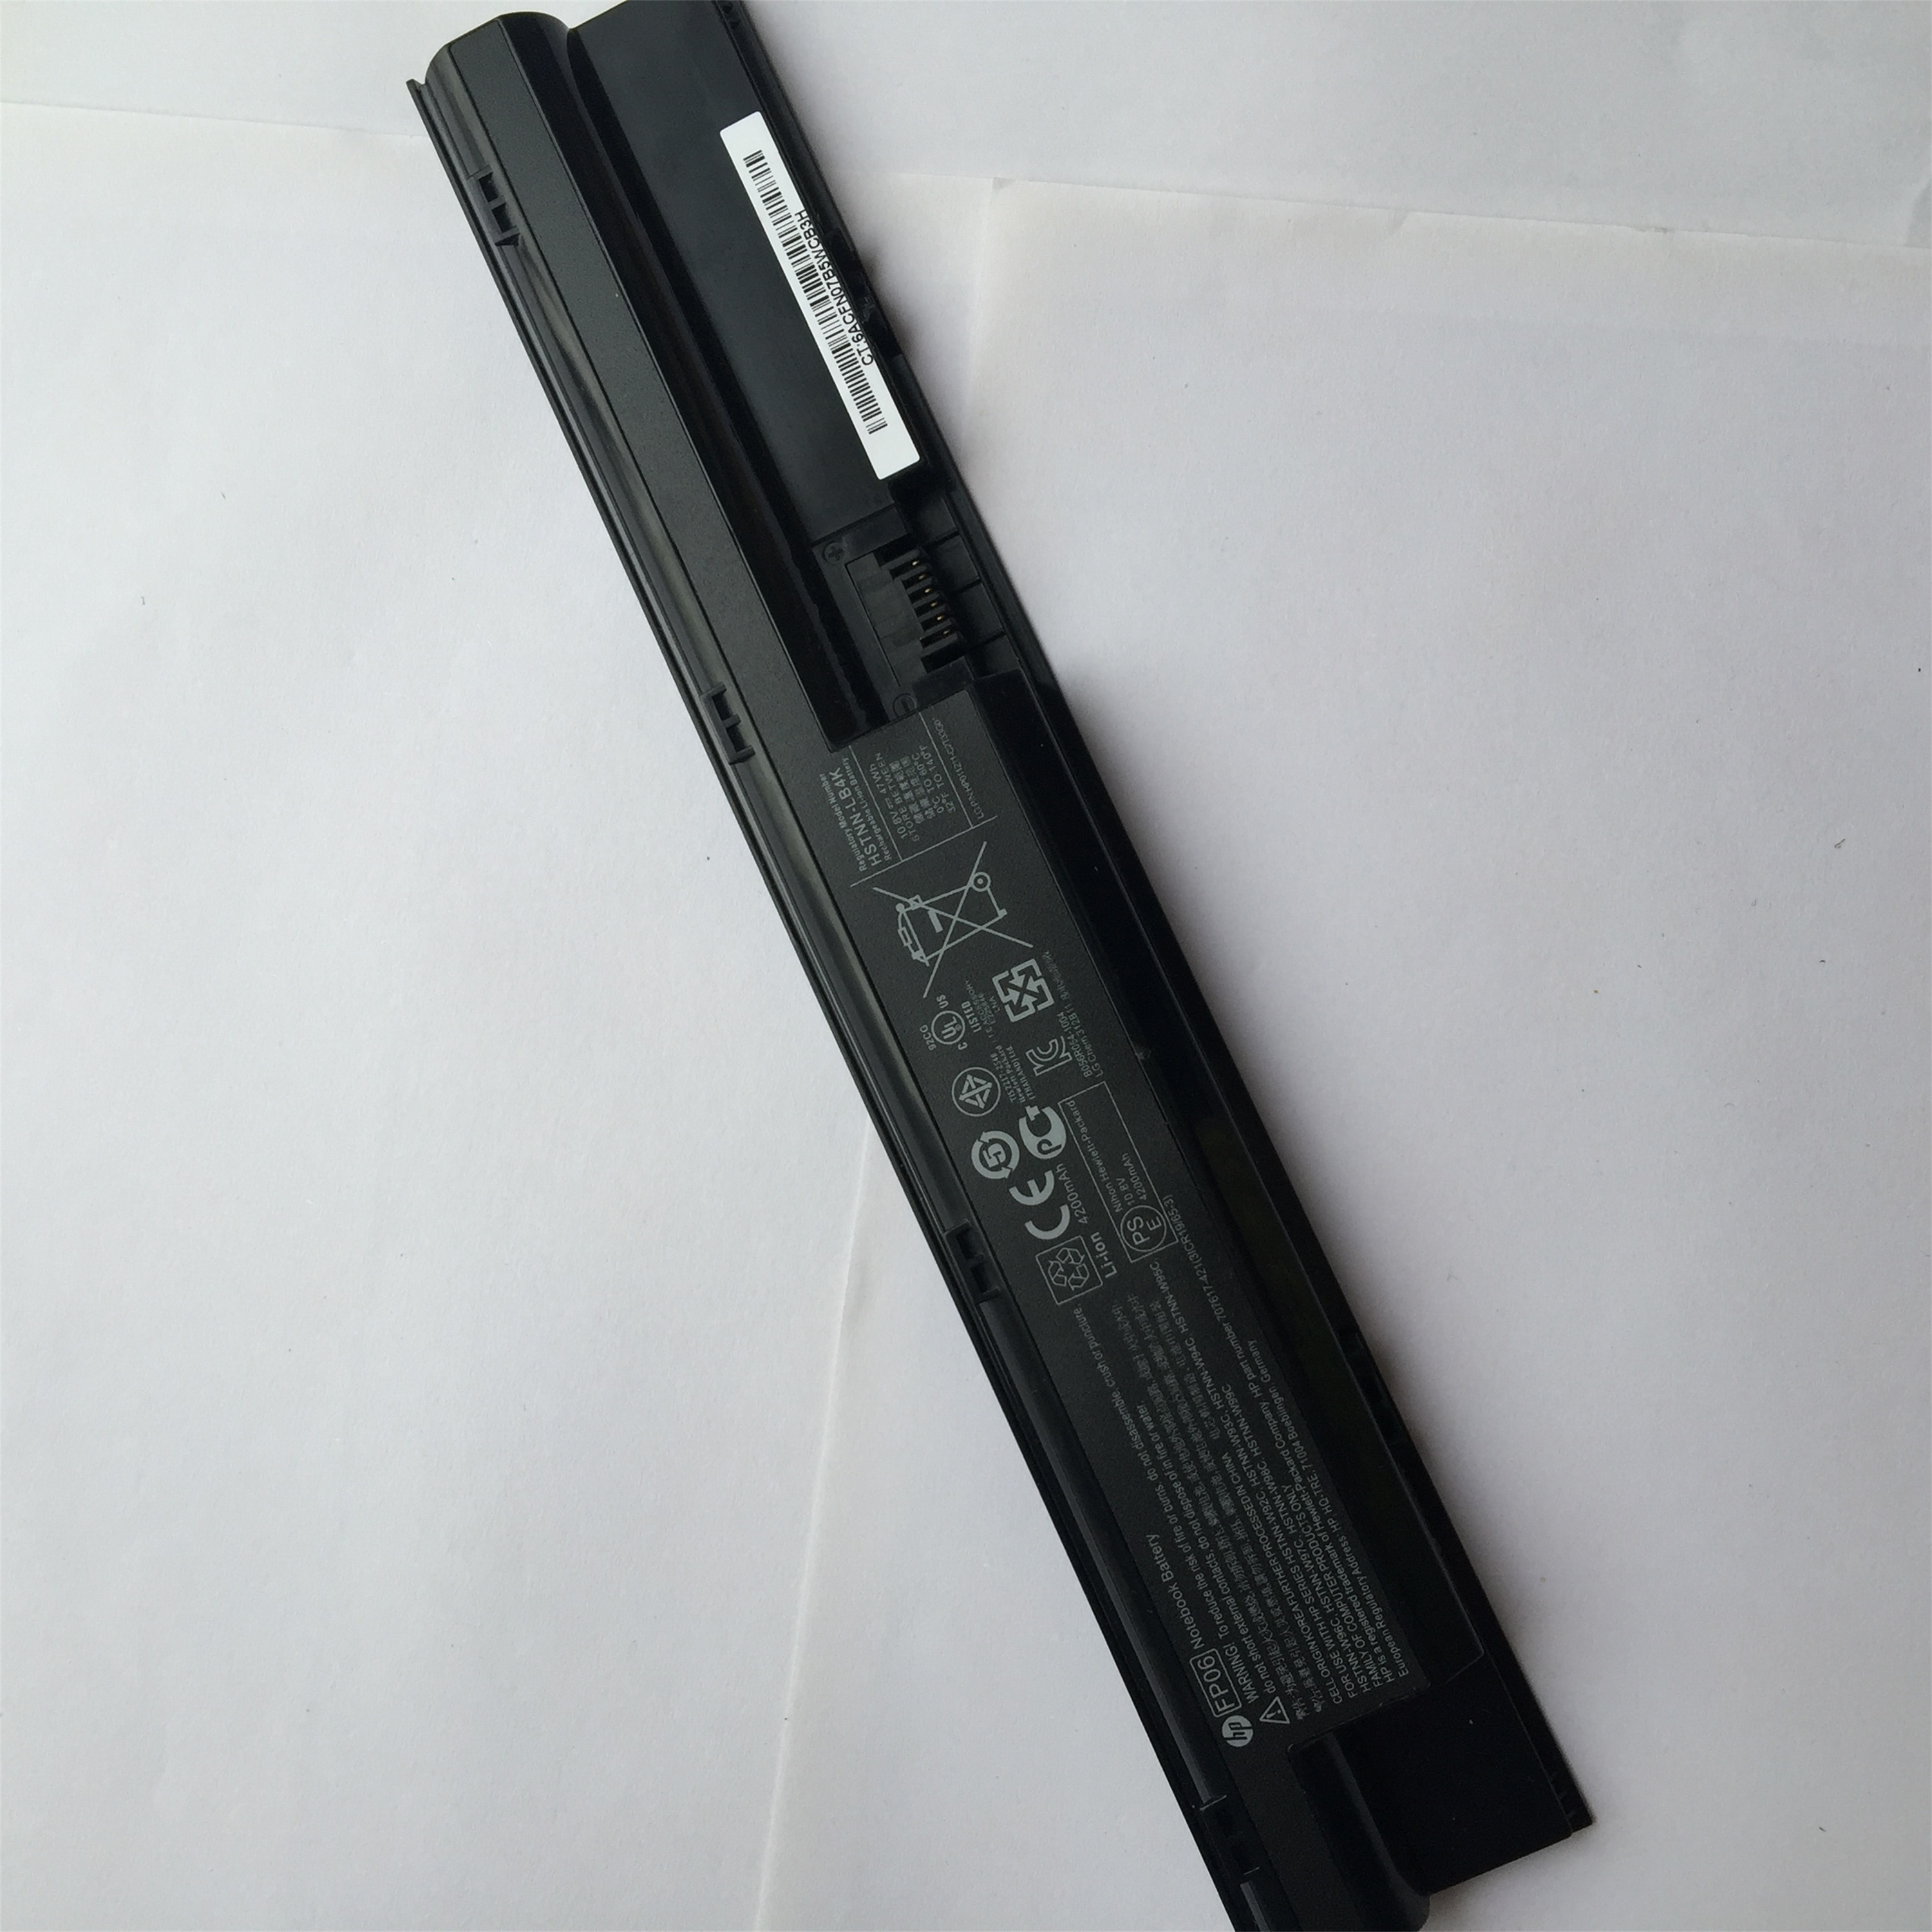 FP06 rechargeable lithium ion Notebook battery Laptop battery For HP ProBook 440 445 450 455 470 G0 G1 708458-001 708457-001 10.8V 47Wh